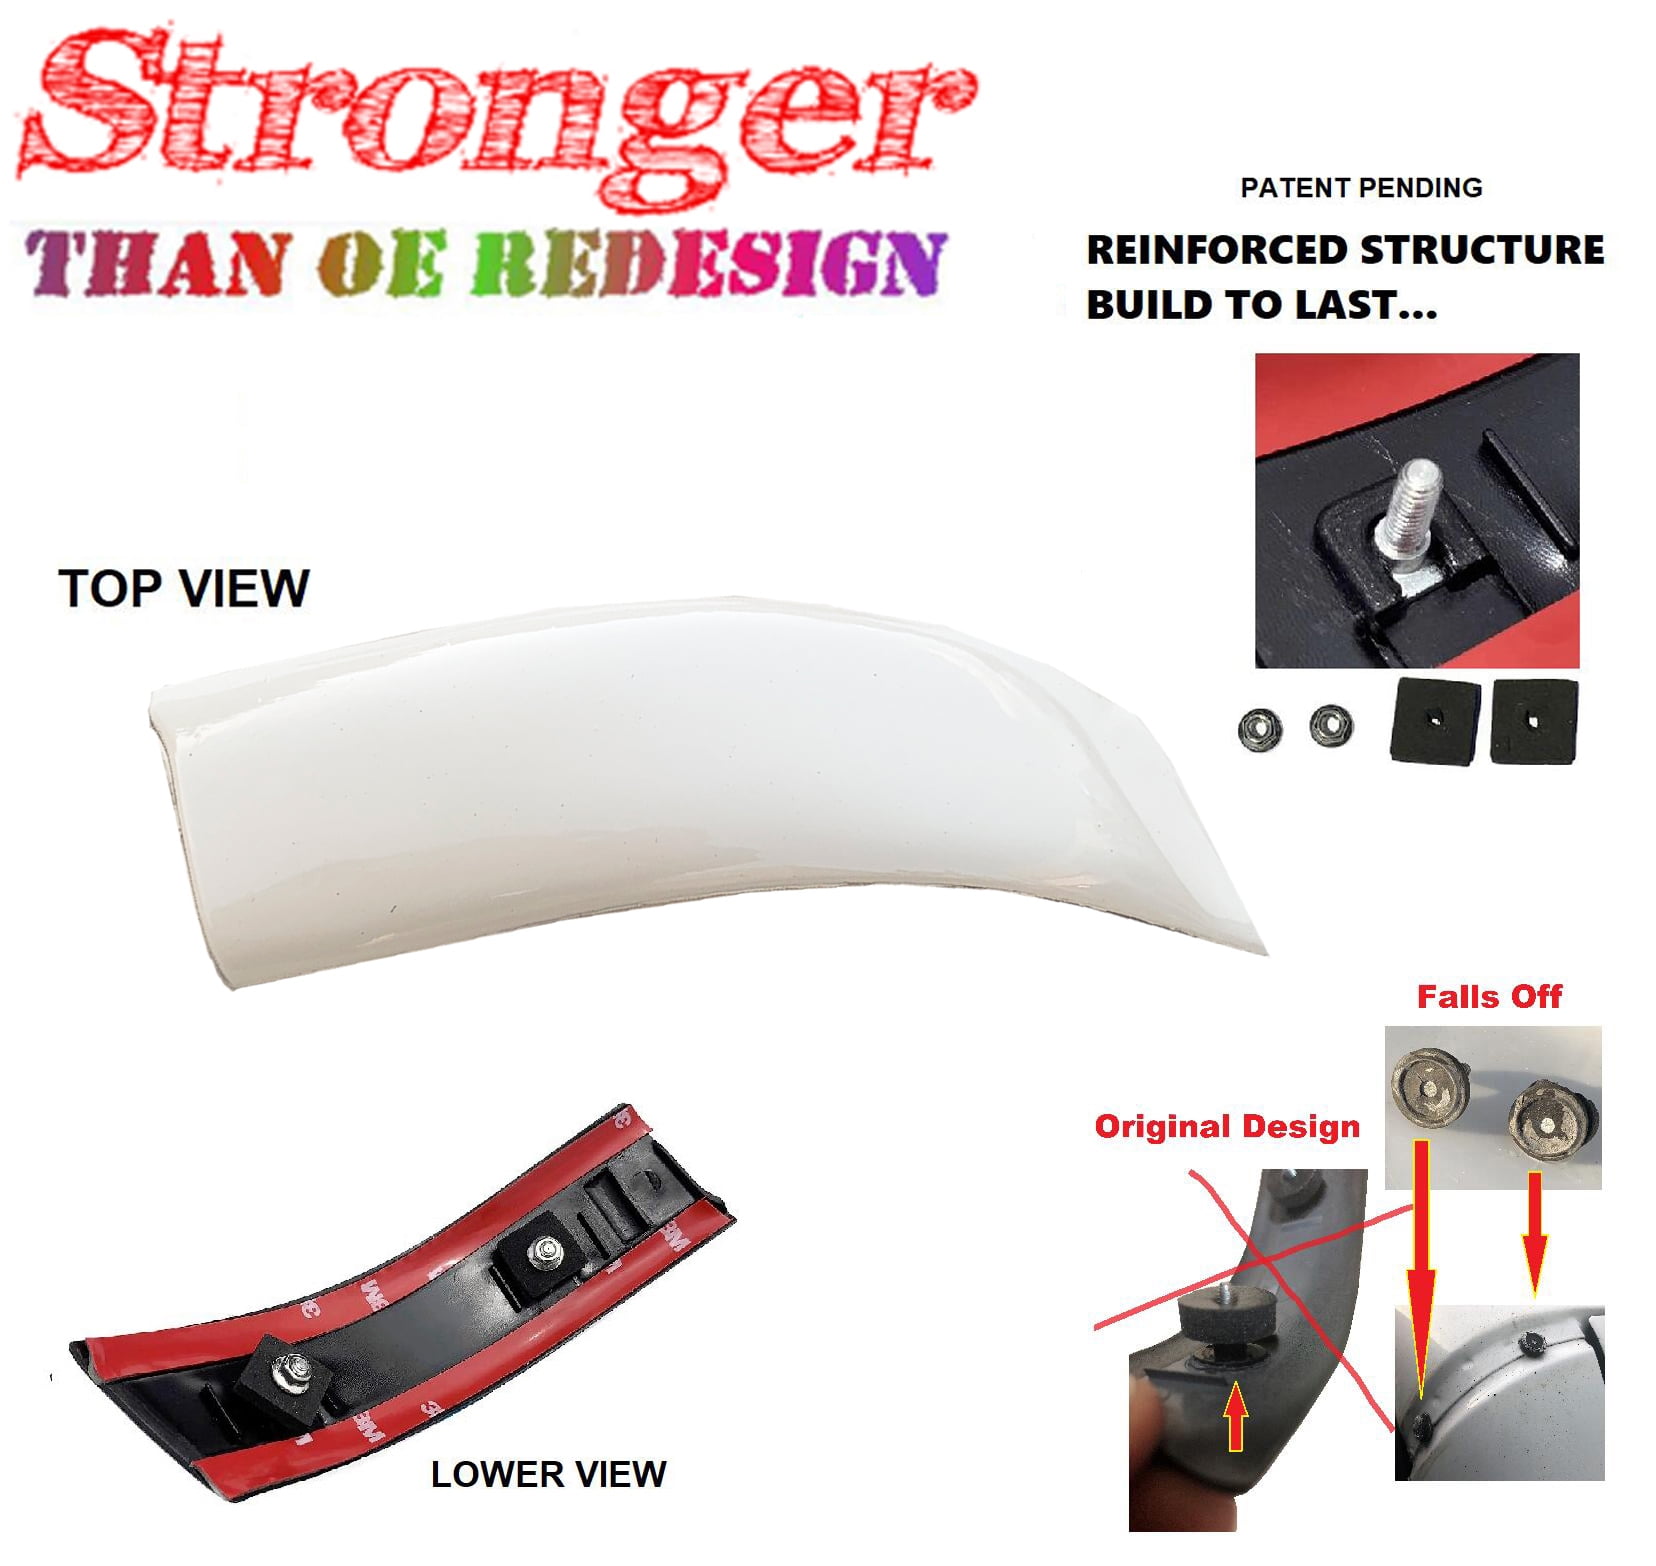 Upgraded Roof Molding For 99-07 Ford F-250 F-350 F-450 F-550 Super Duty Left Driver Side LH YO Oxford White YC3Z2551729PTM 1999 2000 2001 2002 2003 2004 2005 2006 2007